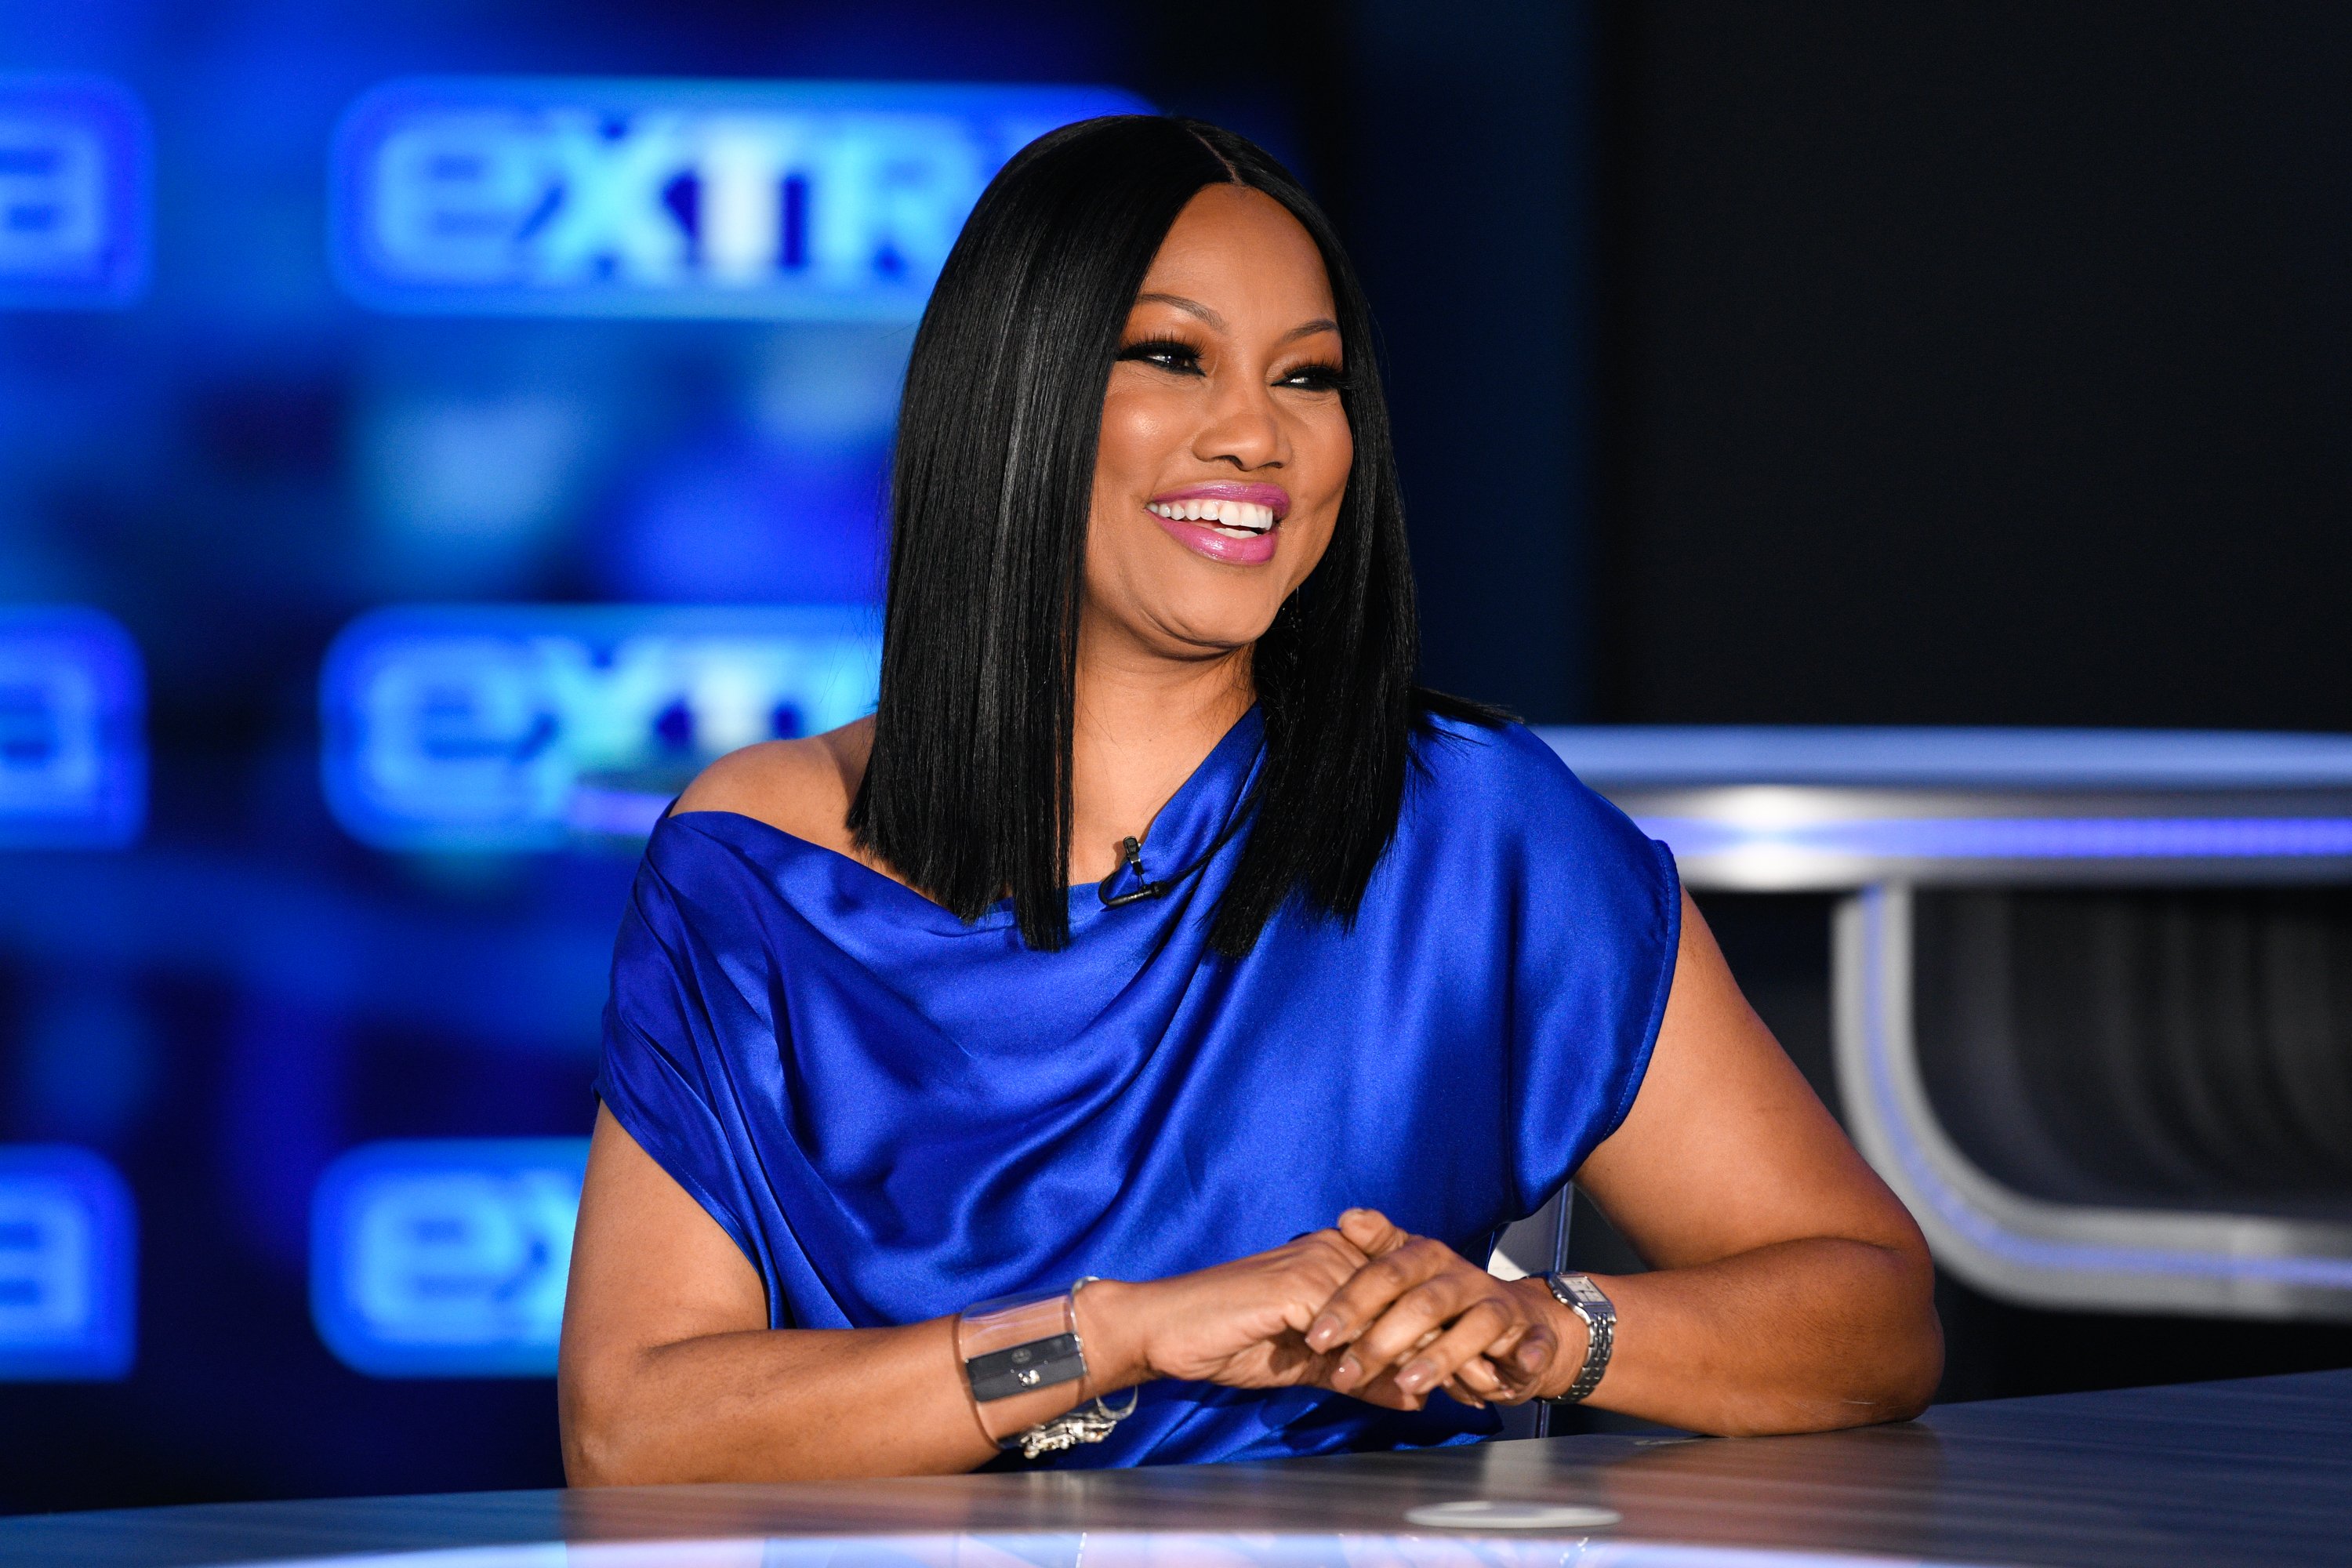 Garcelle Beauvais visits "Extra" at Burbank Studios, November 26, 2019 in Burbank, California. | Source: Getty Images